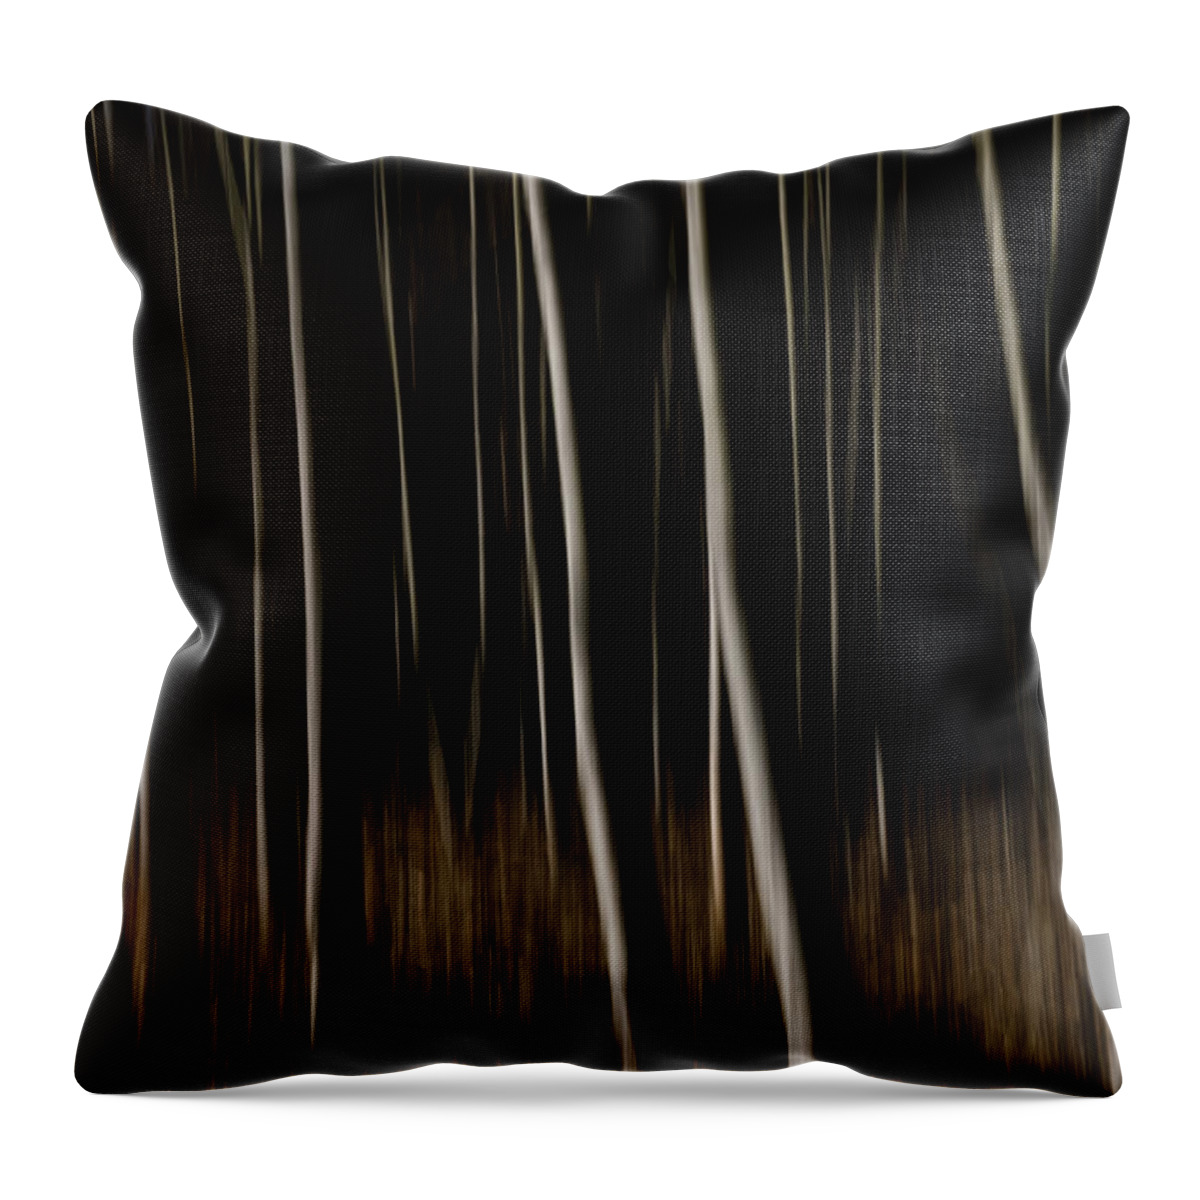 Abstract Throw Pillow featuring the photograph Abstract Forest - Fine Art Photography Print by Martin Vorel Minimalist Photography